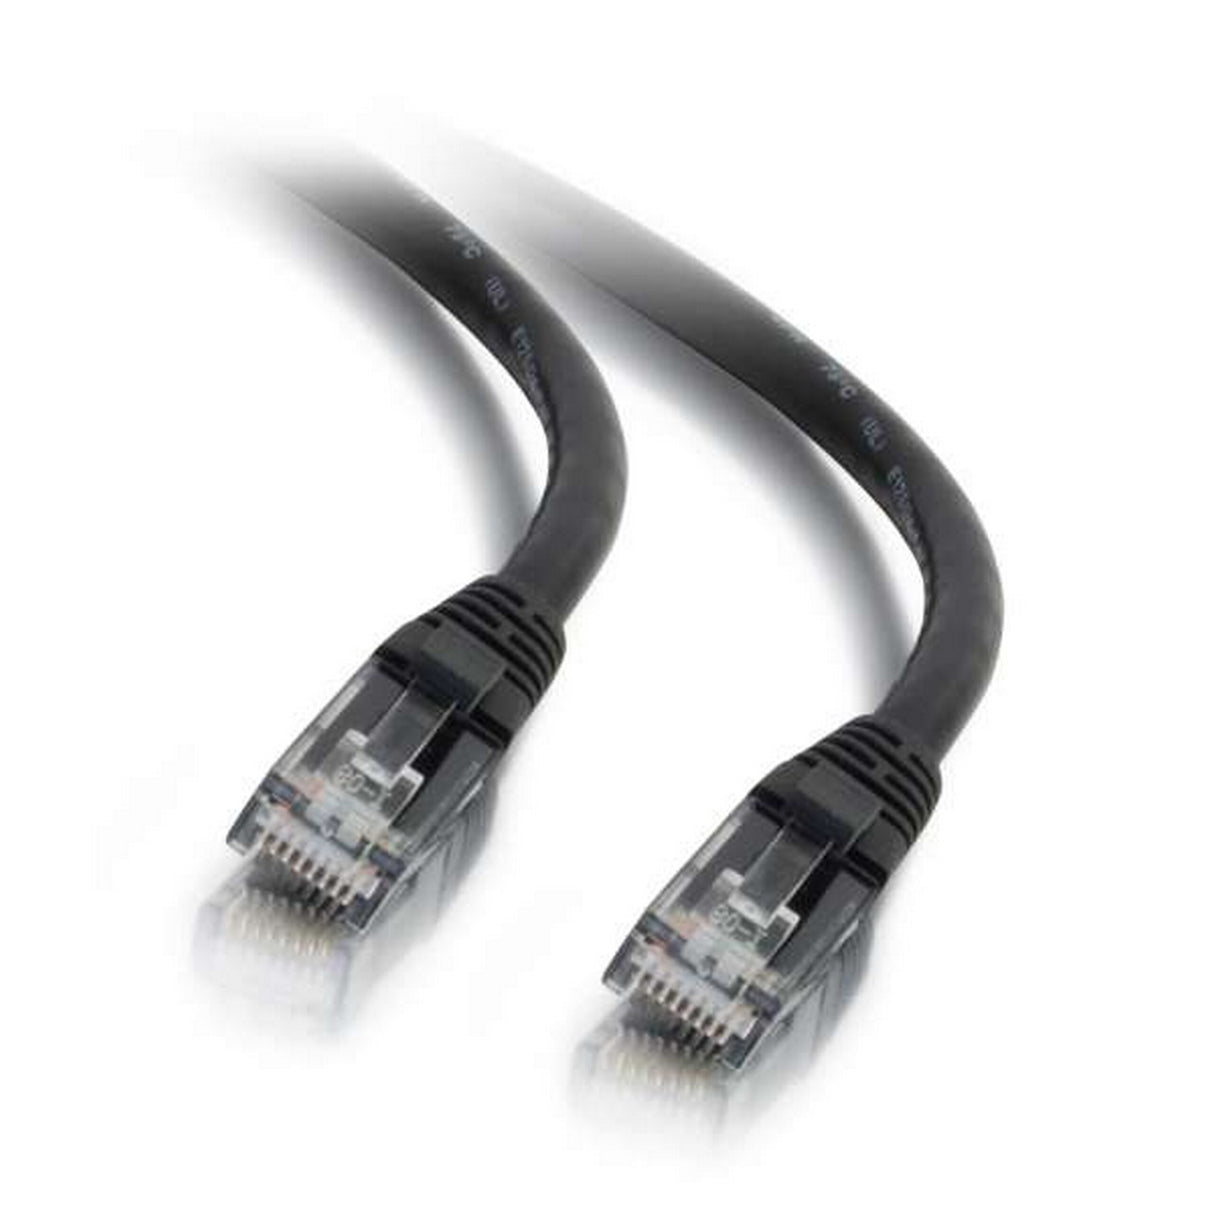 C2G 27153 Cat6 Snagless Unshielded UTP Ethernet Network Patch Cable, Black, 10-Feet